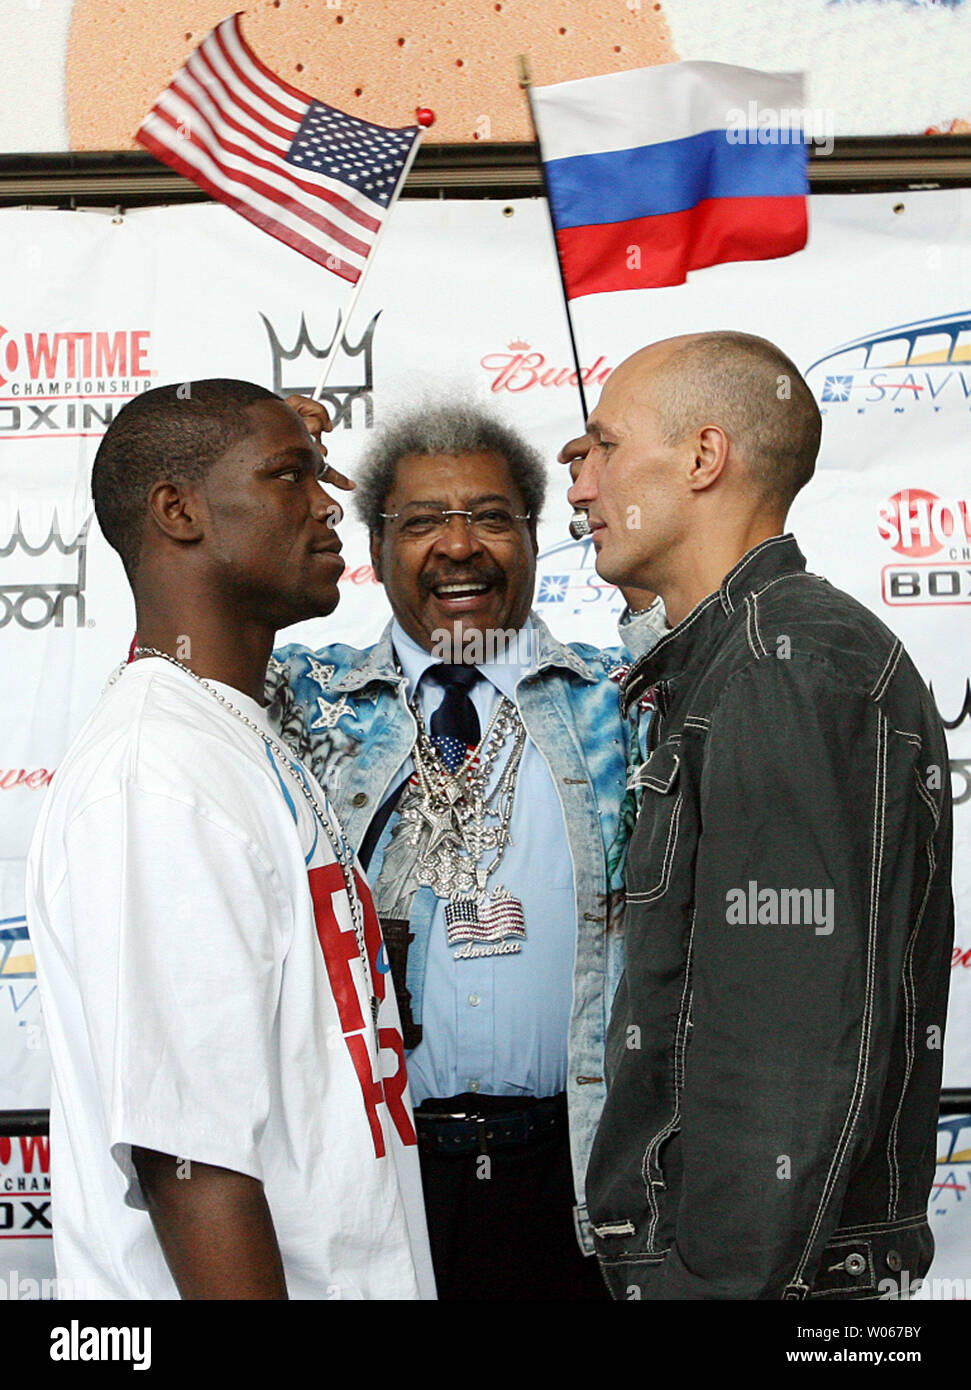 Boxing promoter Don King stands between fighters Cory Spinks (L) and Roman Karmazin from Kuztniesk, Russia, at the Savvis Center on July 6, 2006. Karmazin will be defending his IBF junior middleweight title when the two fight on July 8. (UPI Photo/Bill Greenblatt) Stock Photo